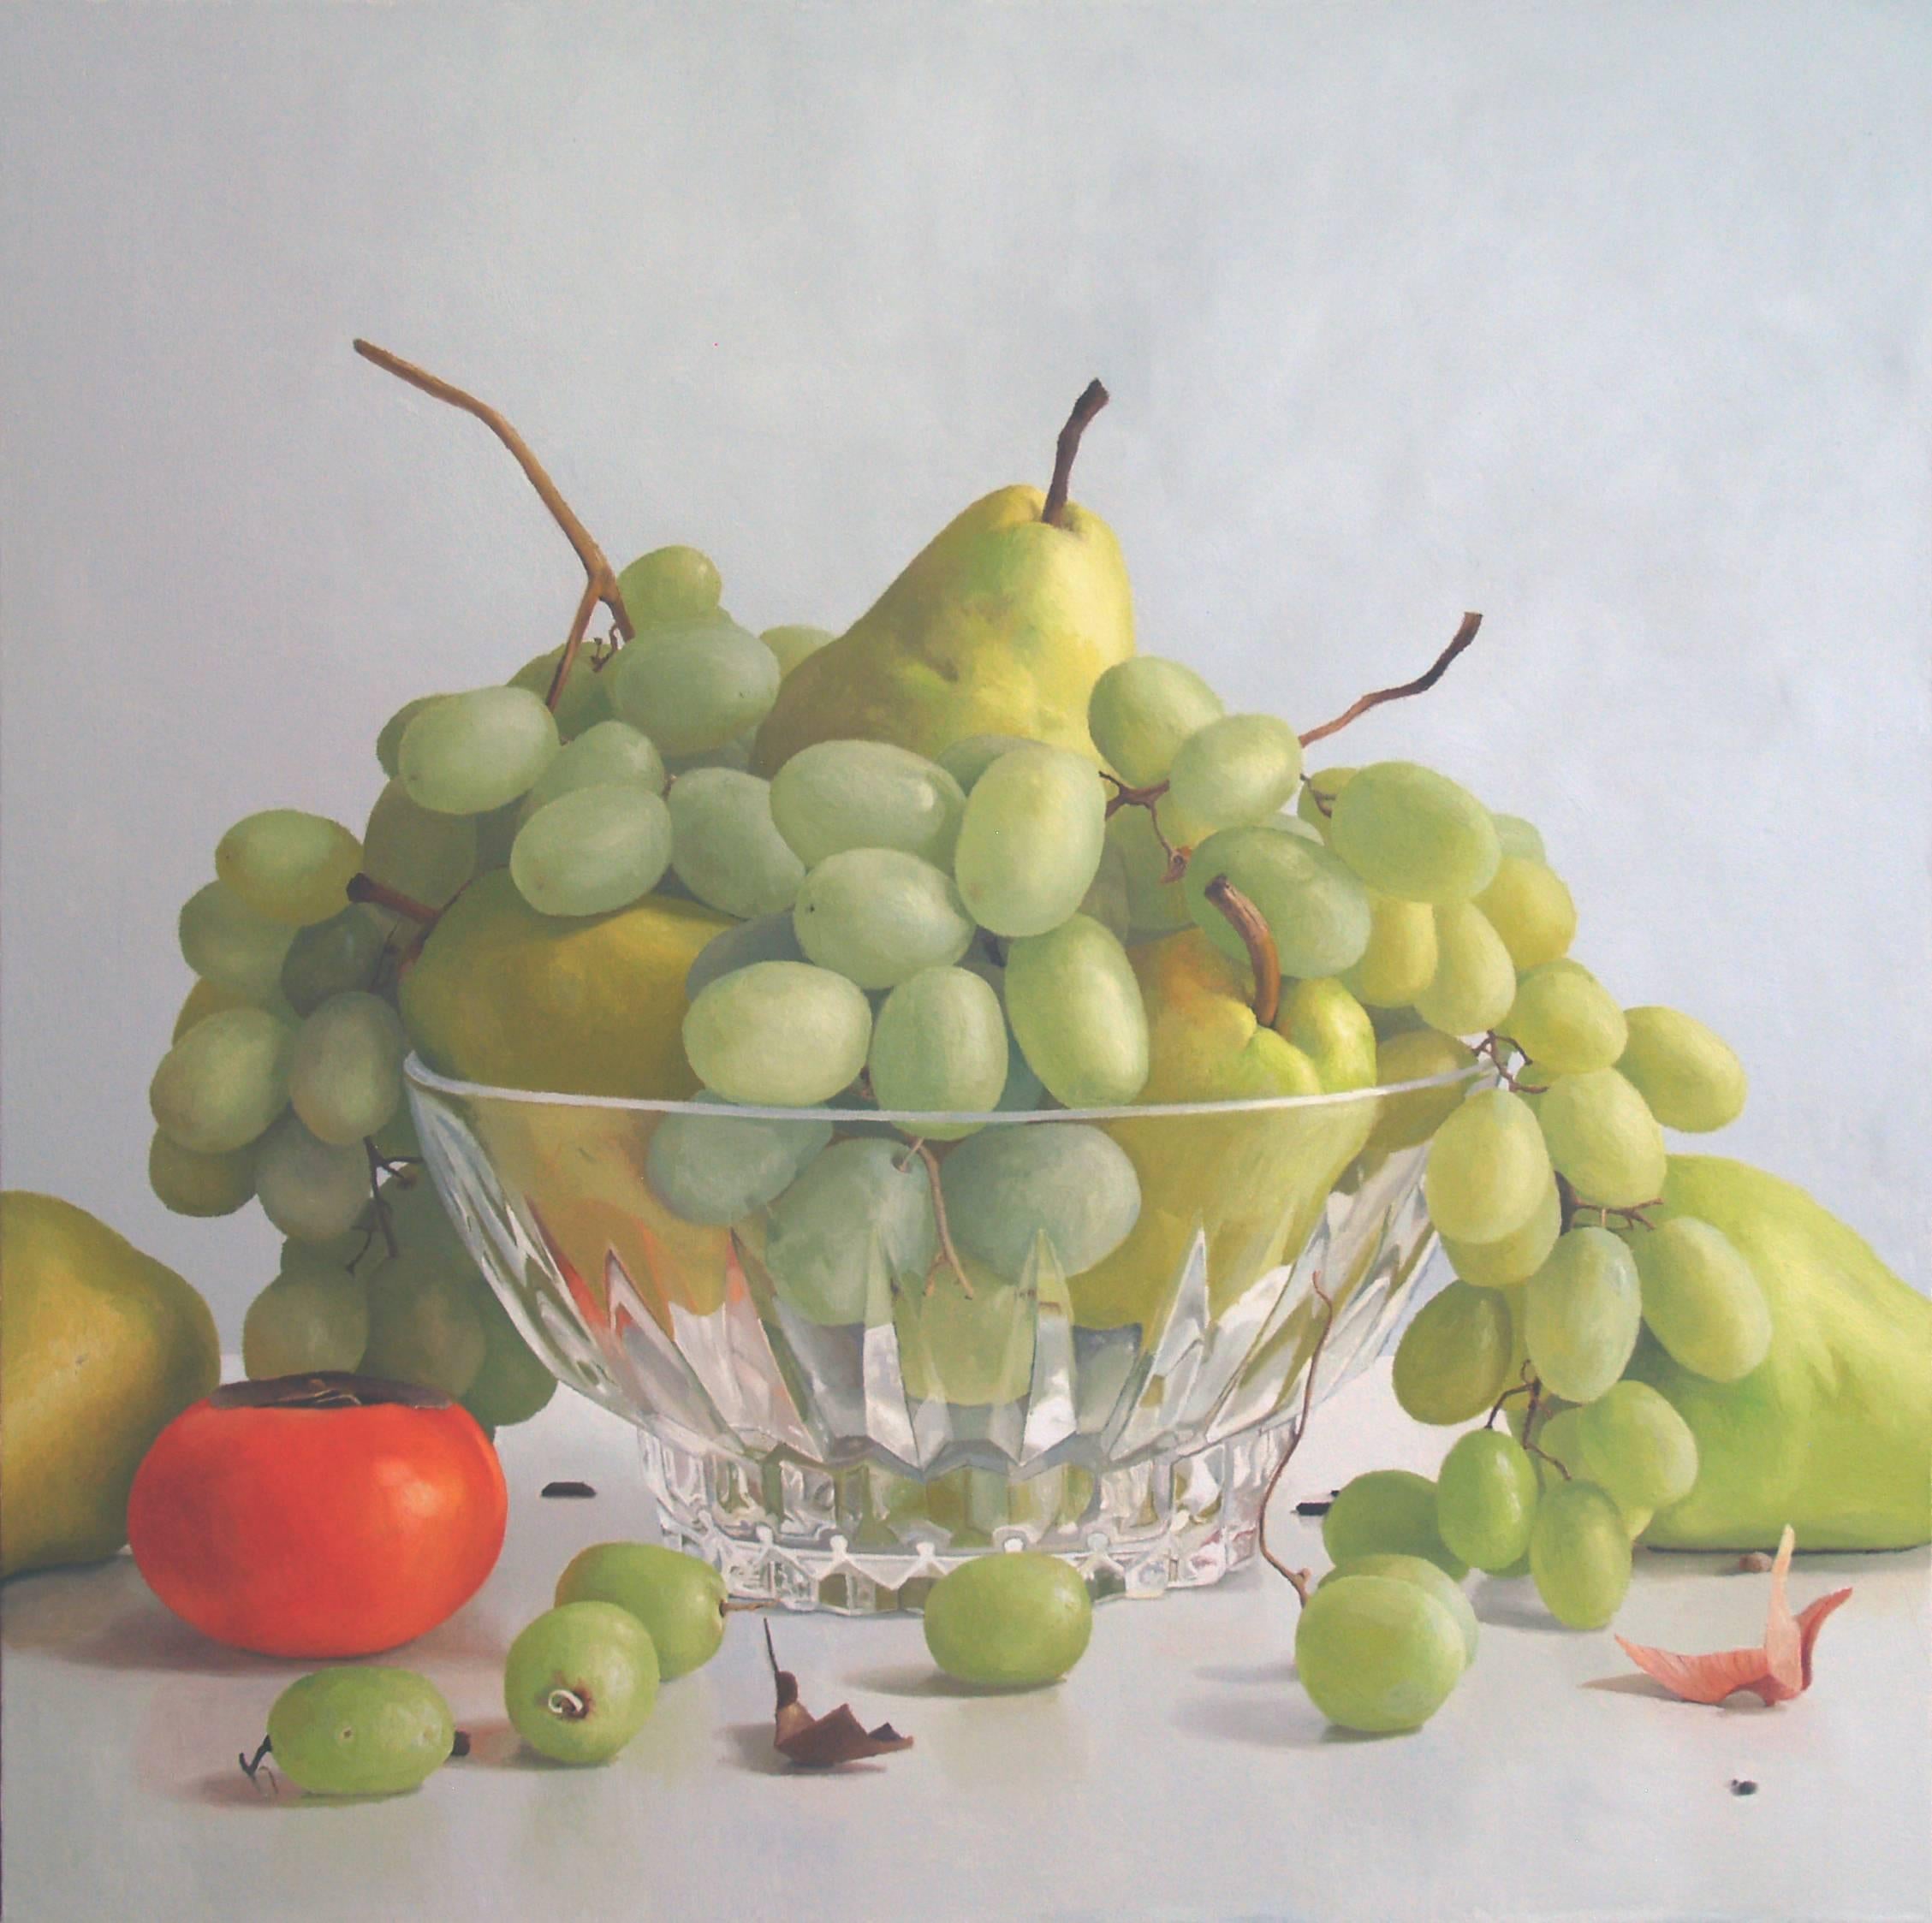 Grapes in Glass Bowl with Persimmon - Painting by Randall W. L. Mooers